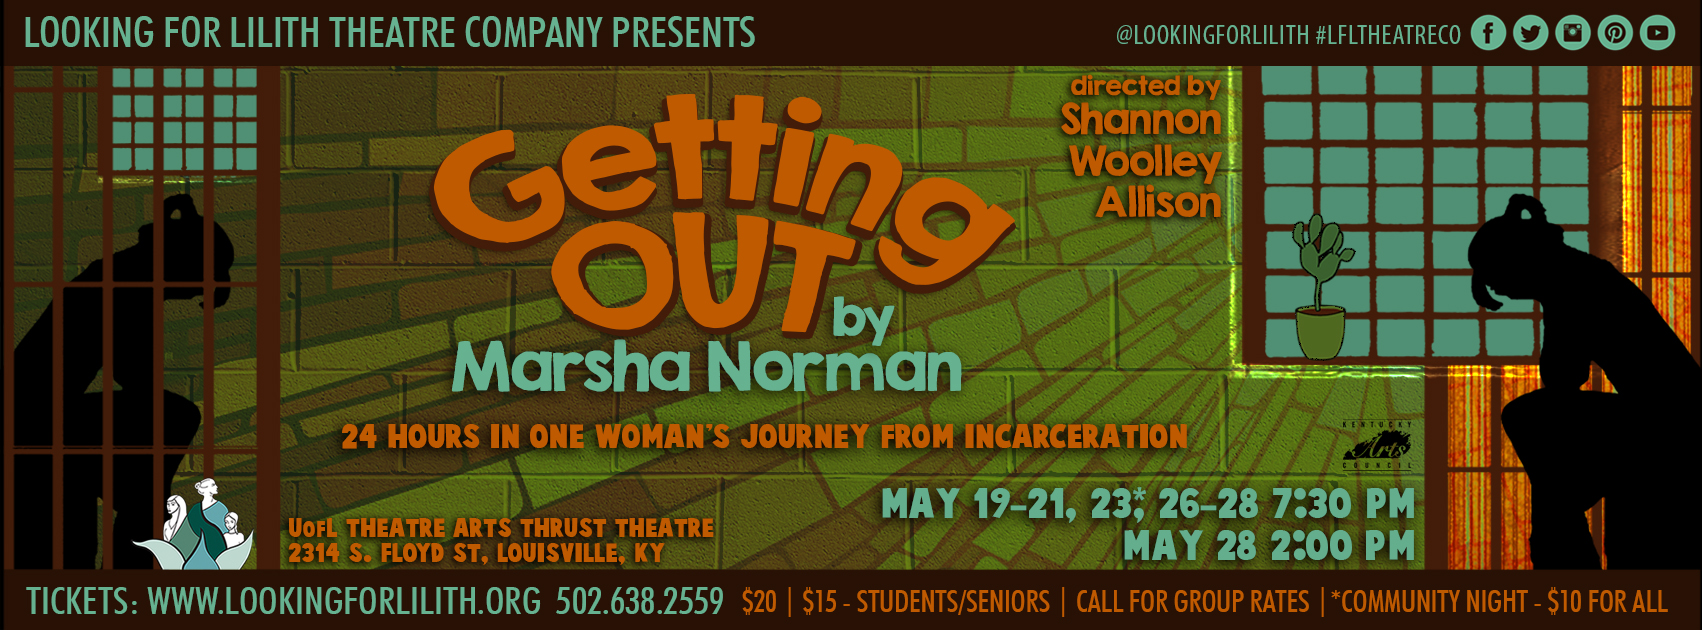 Looking For Lilith Presents Marsha Norman's Getting Out